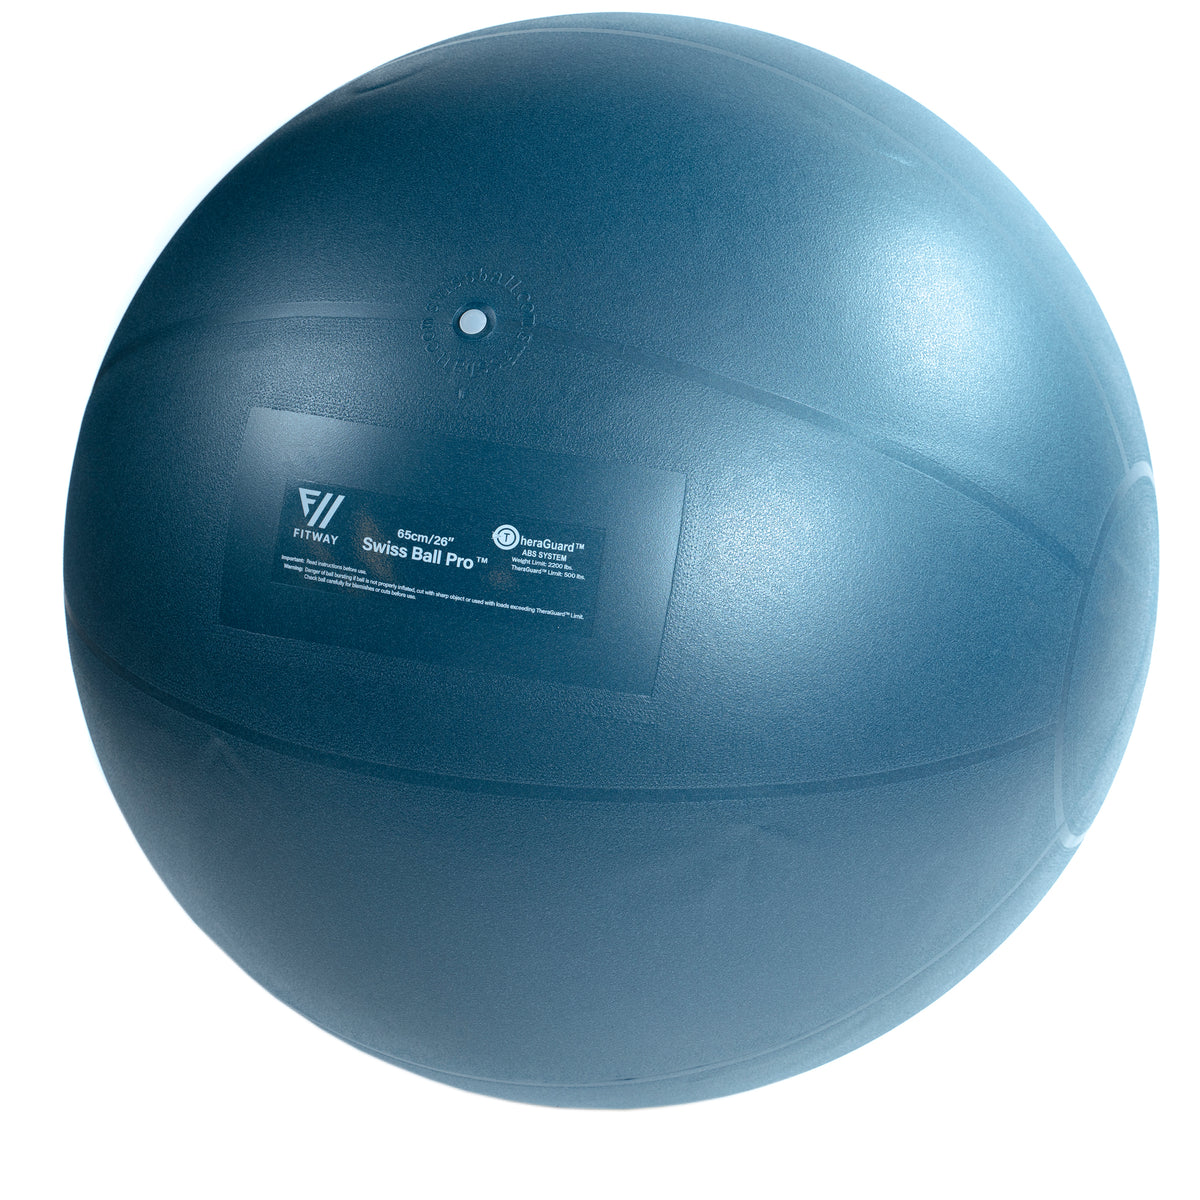 FitWay Equip. 65cm  Stability Ball 